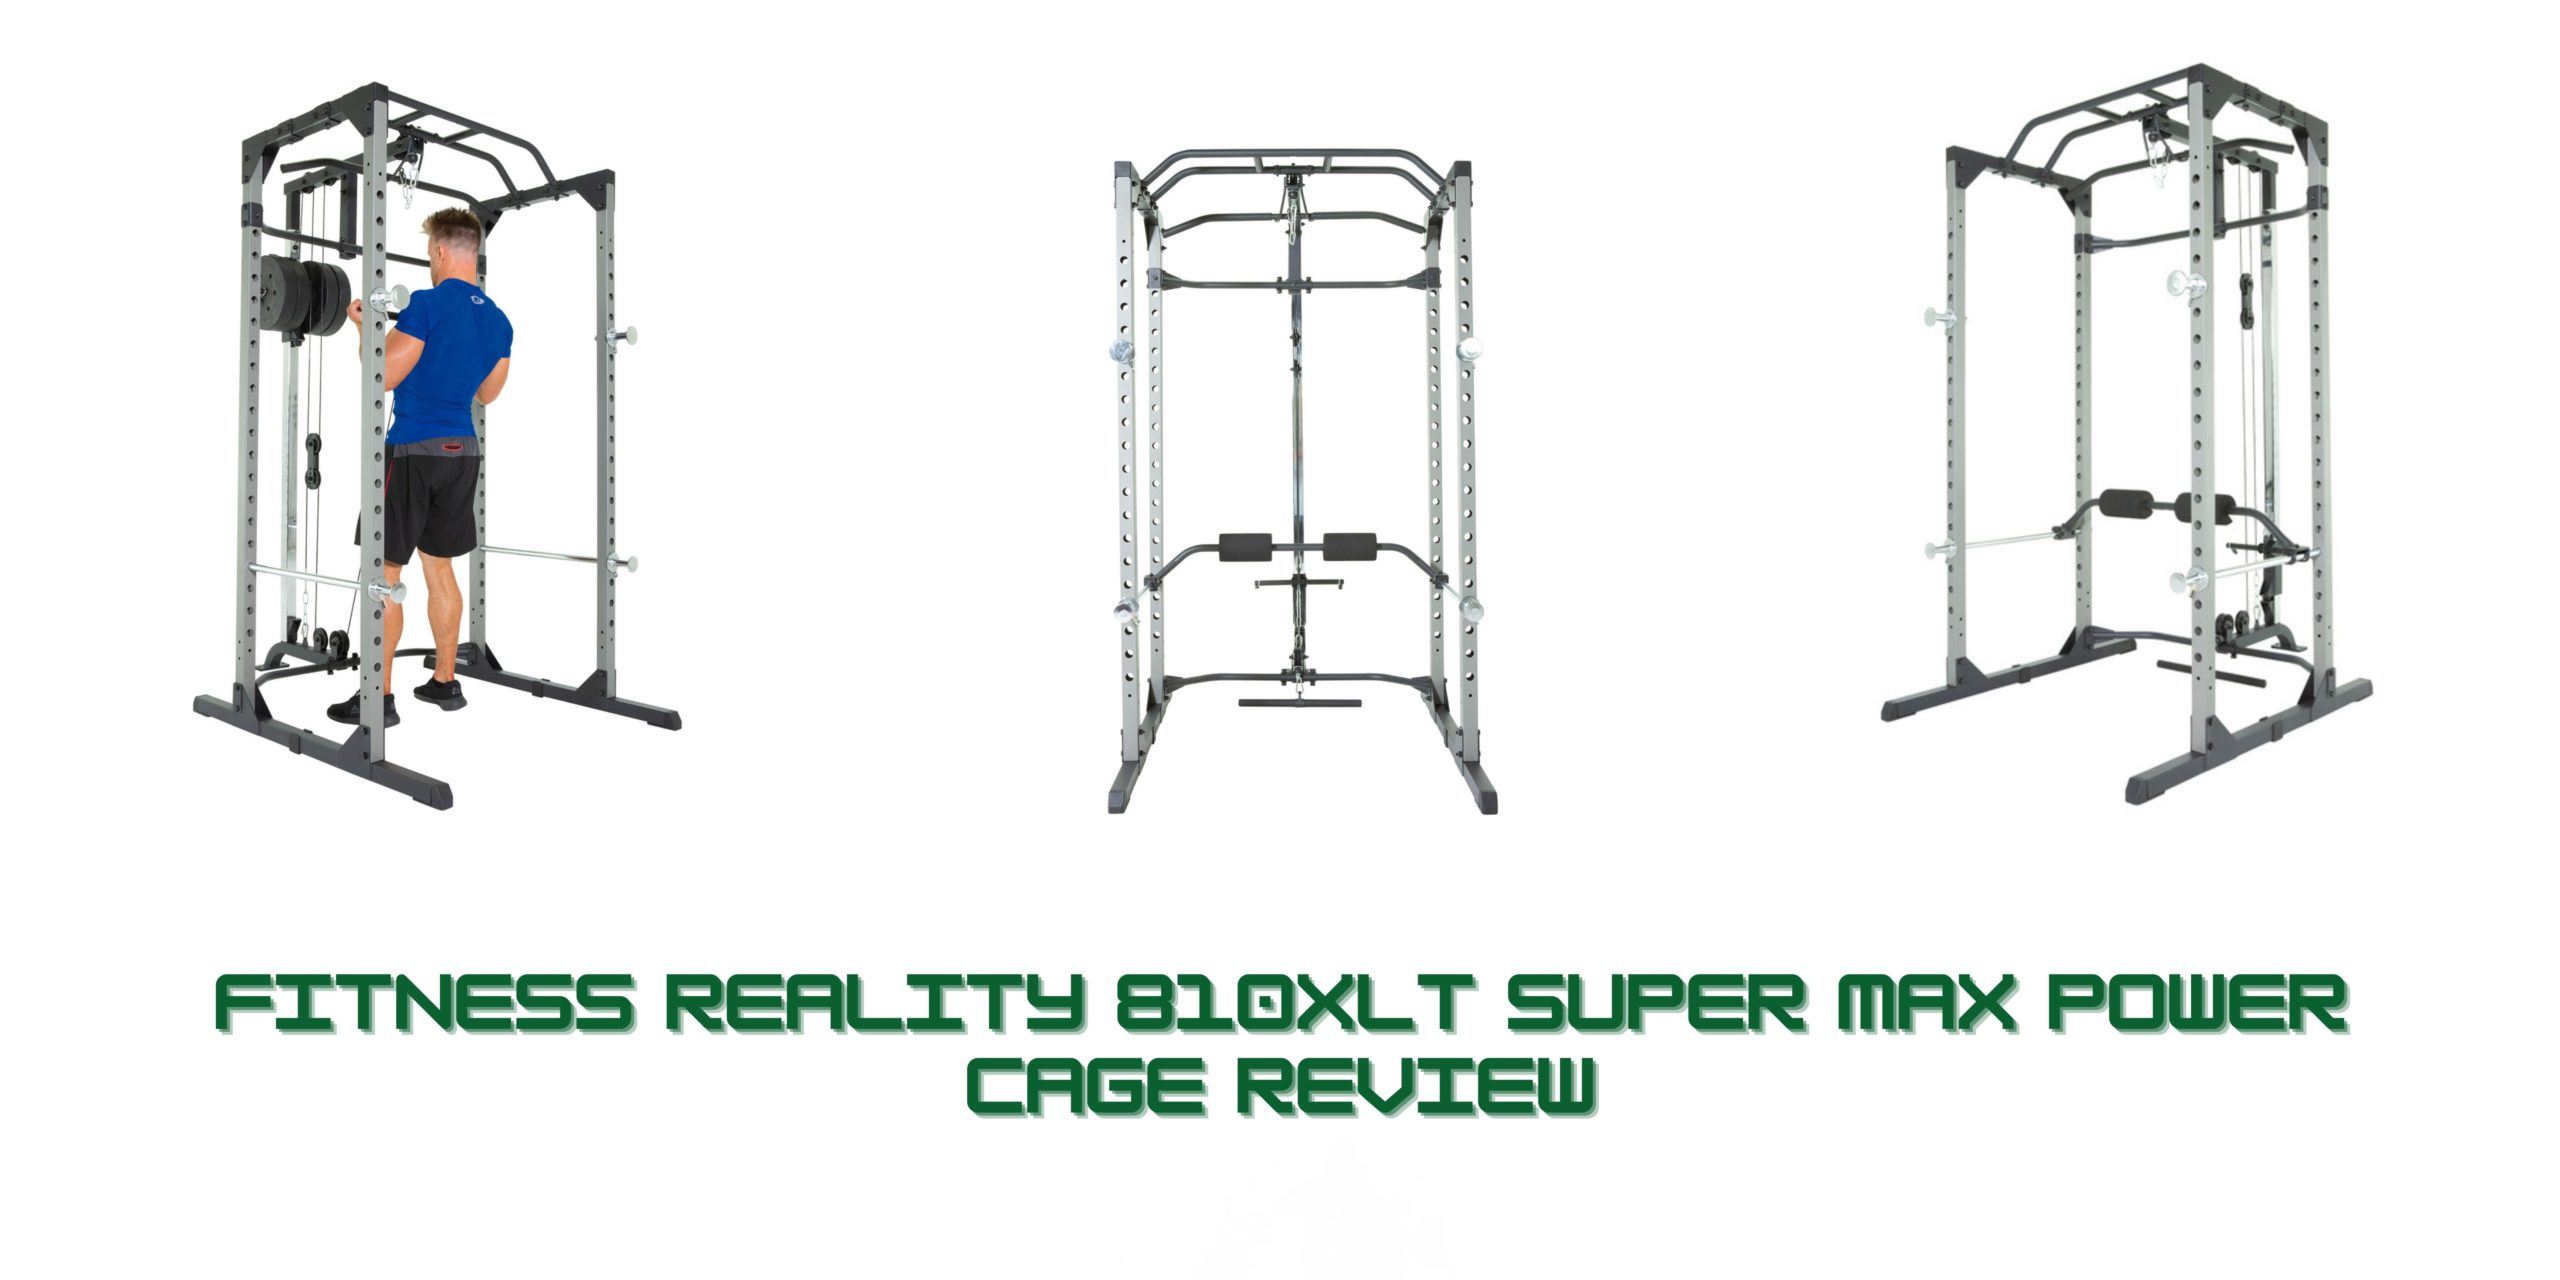 Fitness Reality 810XLT Super Max Power Cage Review scaled